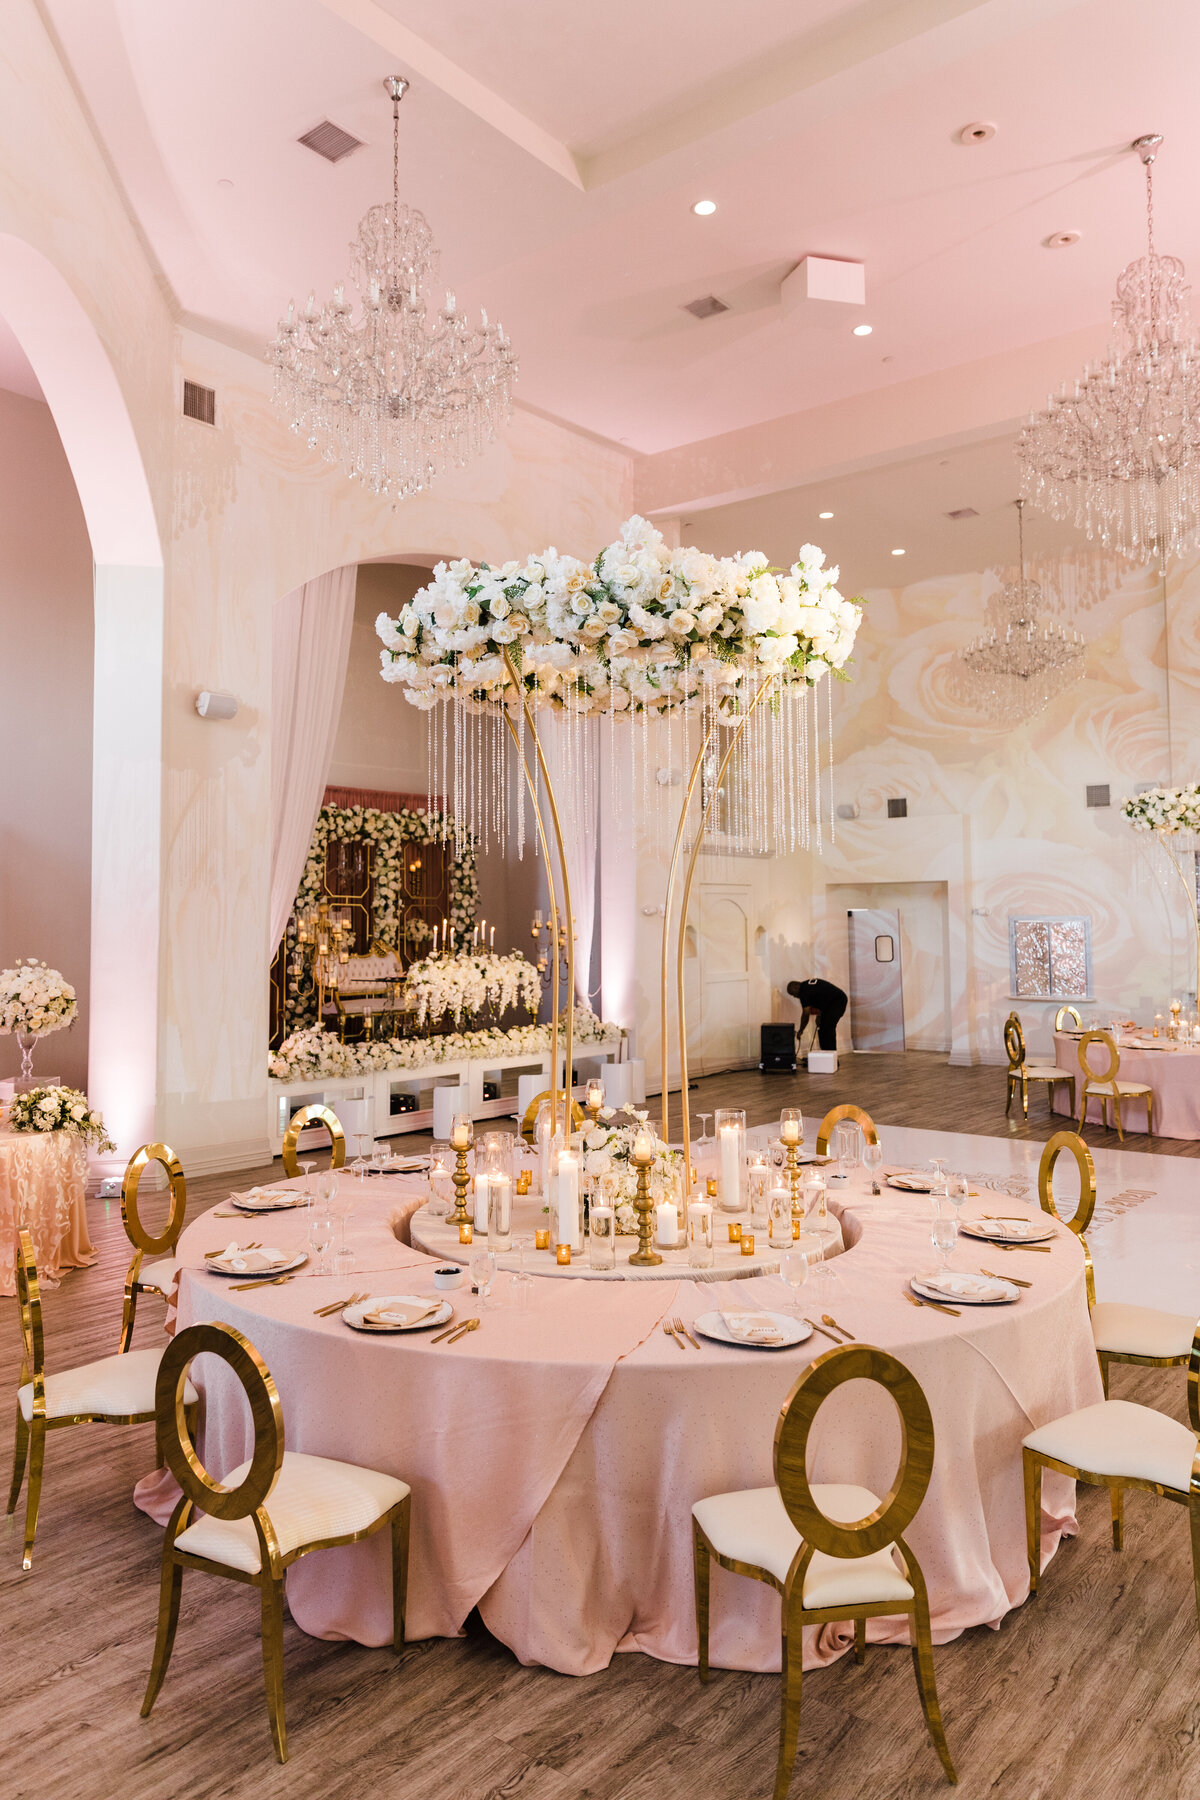 A detail shot of a table and room for a wedding reception in DFW, Texas.  The large, round table is covered in a light pink tablecloth, place settings, many candles of different shapes and sizes, and a large, tall, intricate floral centerpiece that towers above the table itself. The room is white and light pink with more reception tables, multiple chandeliers, a dance floor, and a lavish head table adorned with lots of floral arrangements.